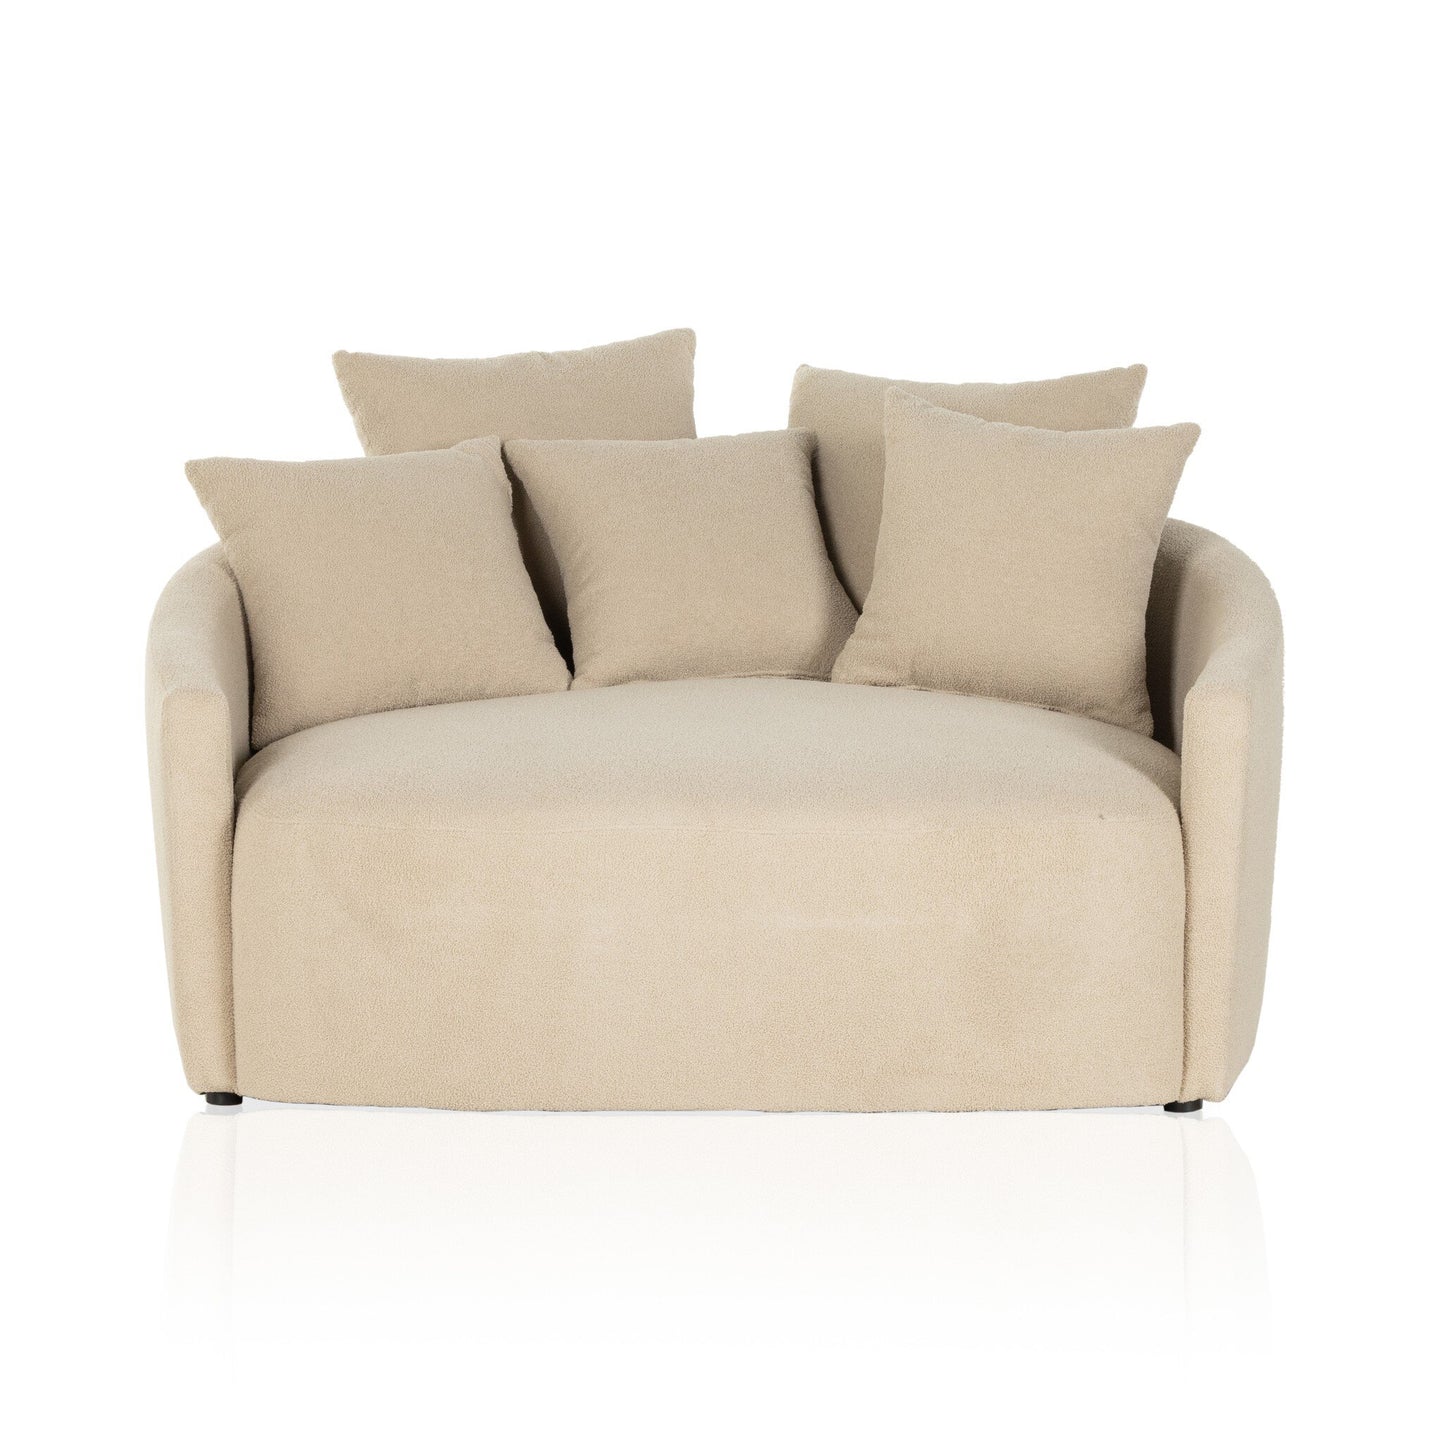 Cleo Media Lounger- Taupe